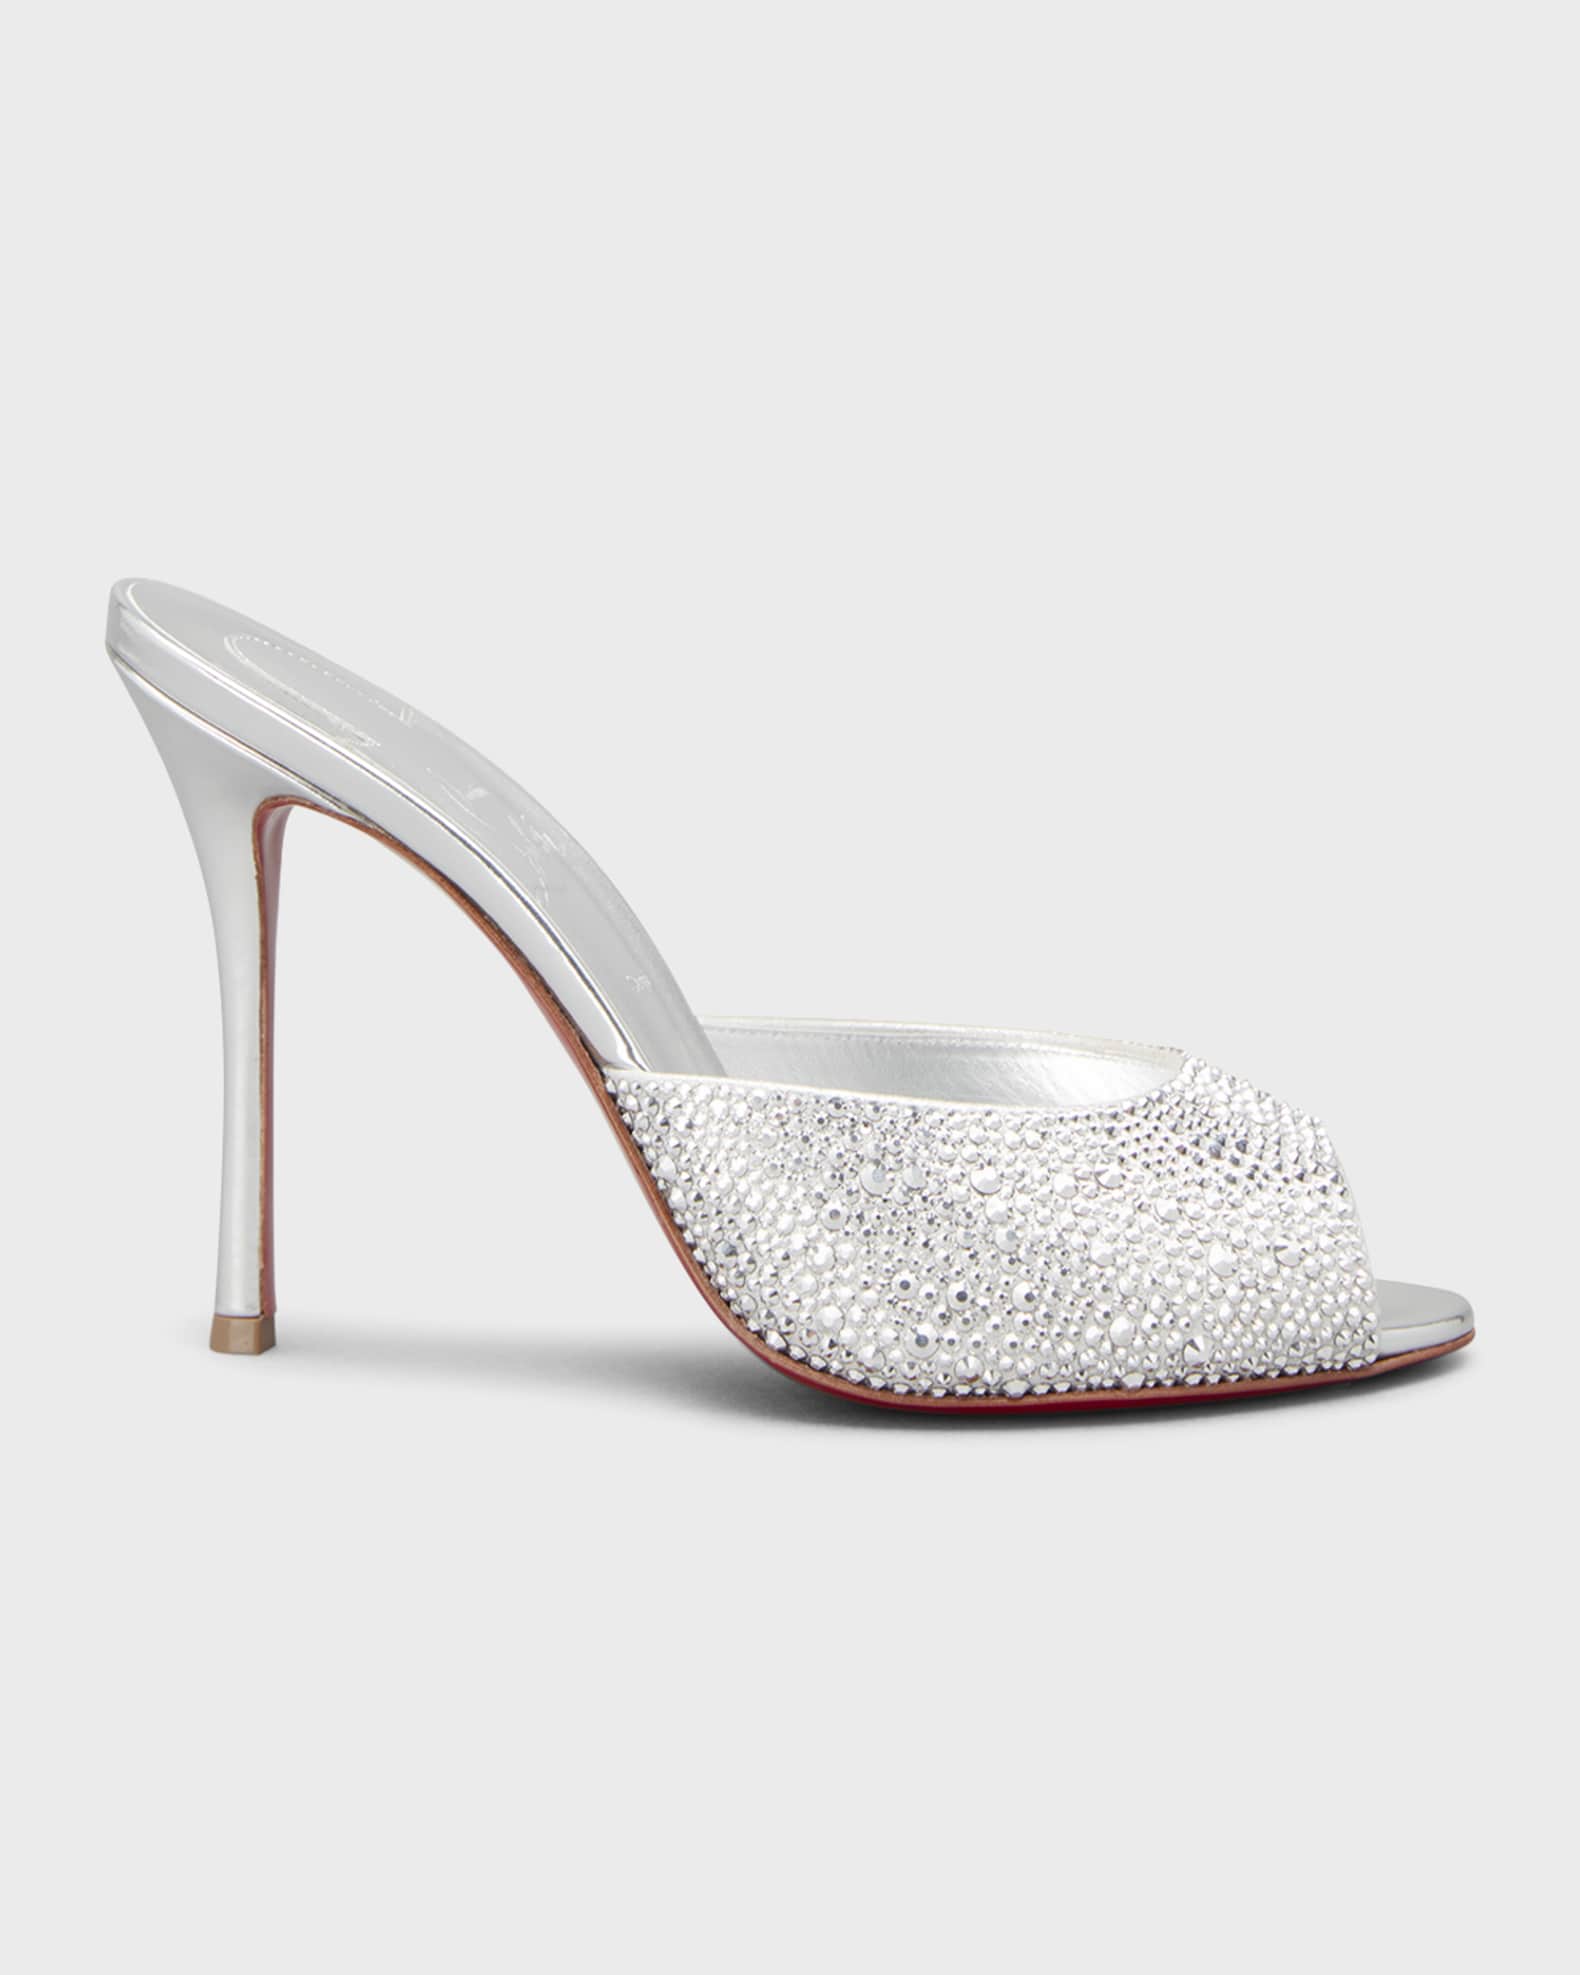 Christian Louboutin Me Dolly Strass Red Sole Slide Sandals in White